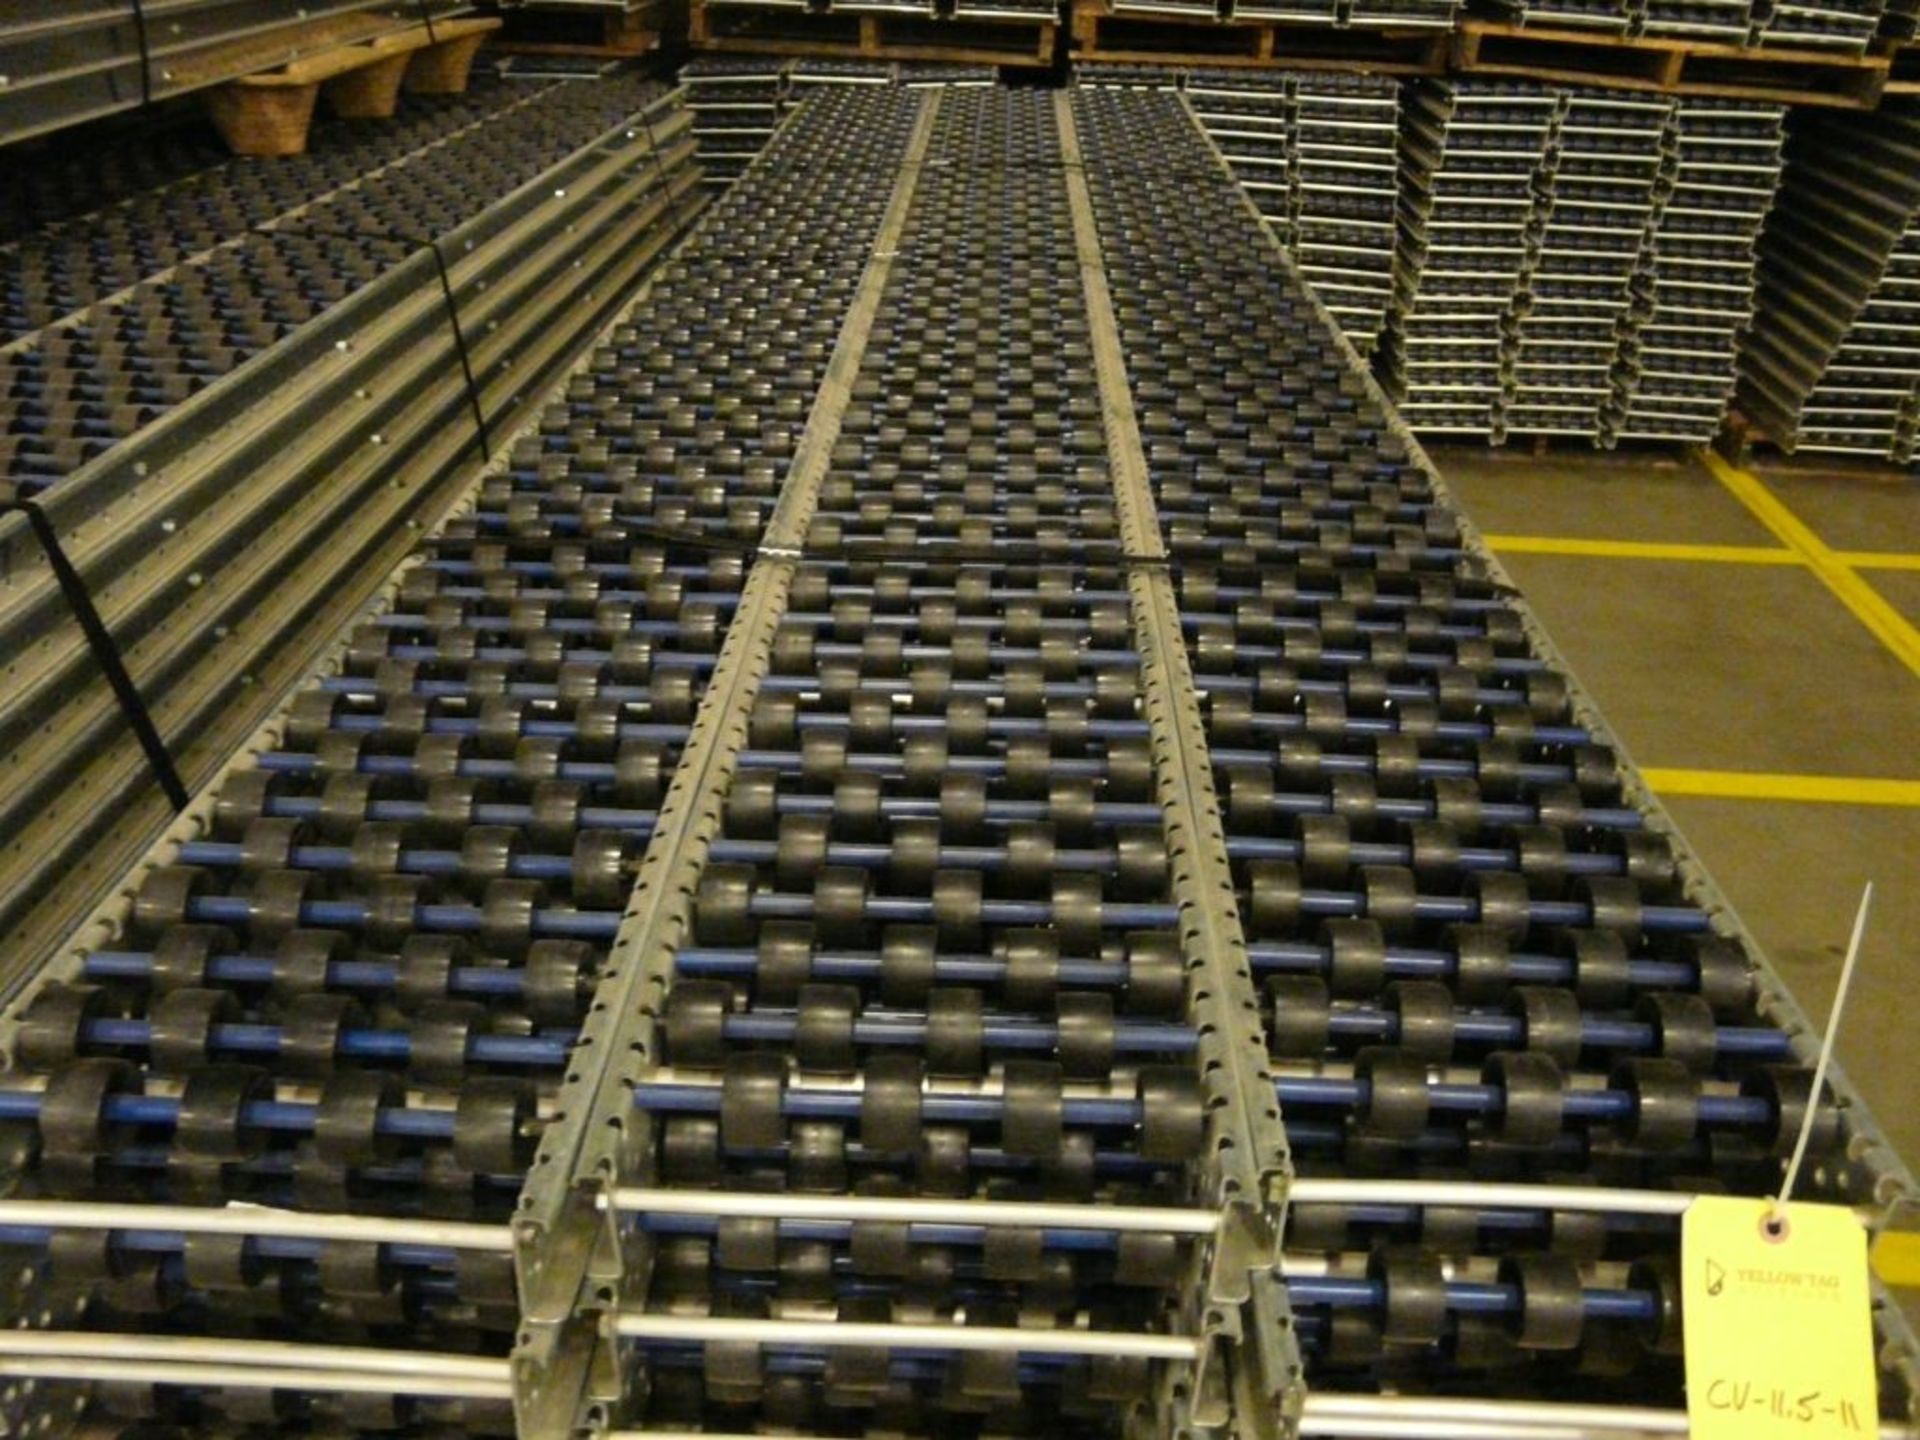 Lot of (90) SpanTrack Wheelbed Carton Flow Conveyors - 11.5'L x 11"W; Tag: 223572 - $30 Lot - Image 3 of 4